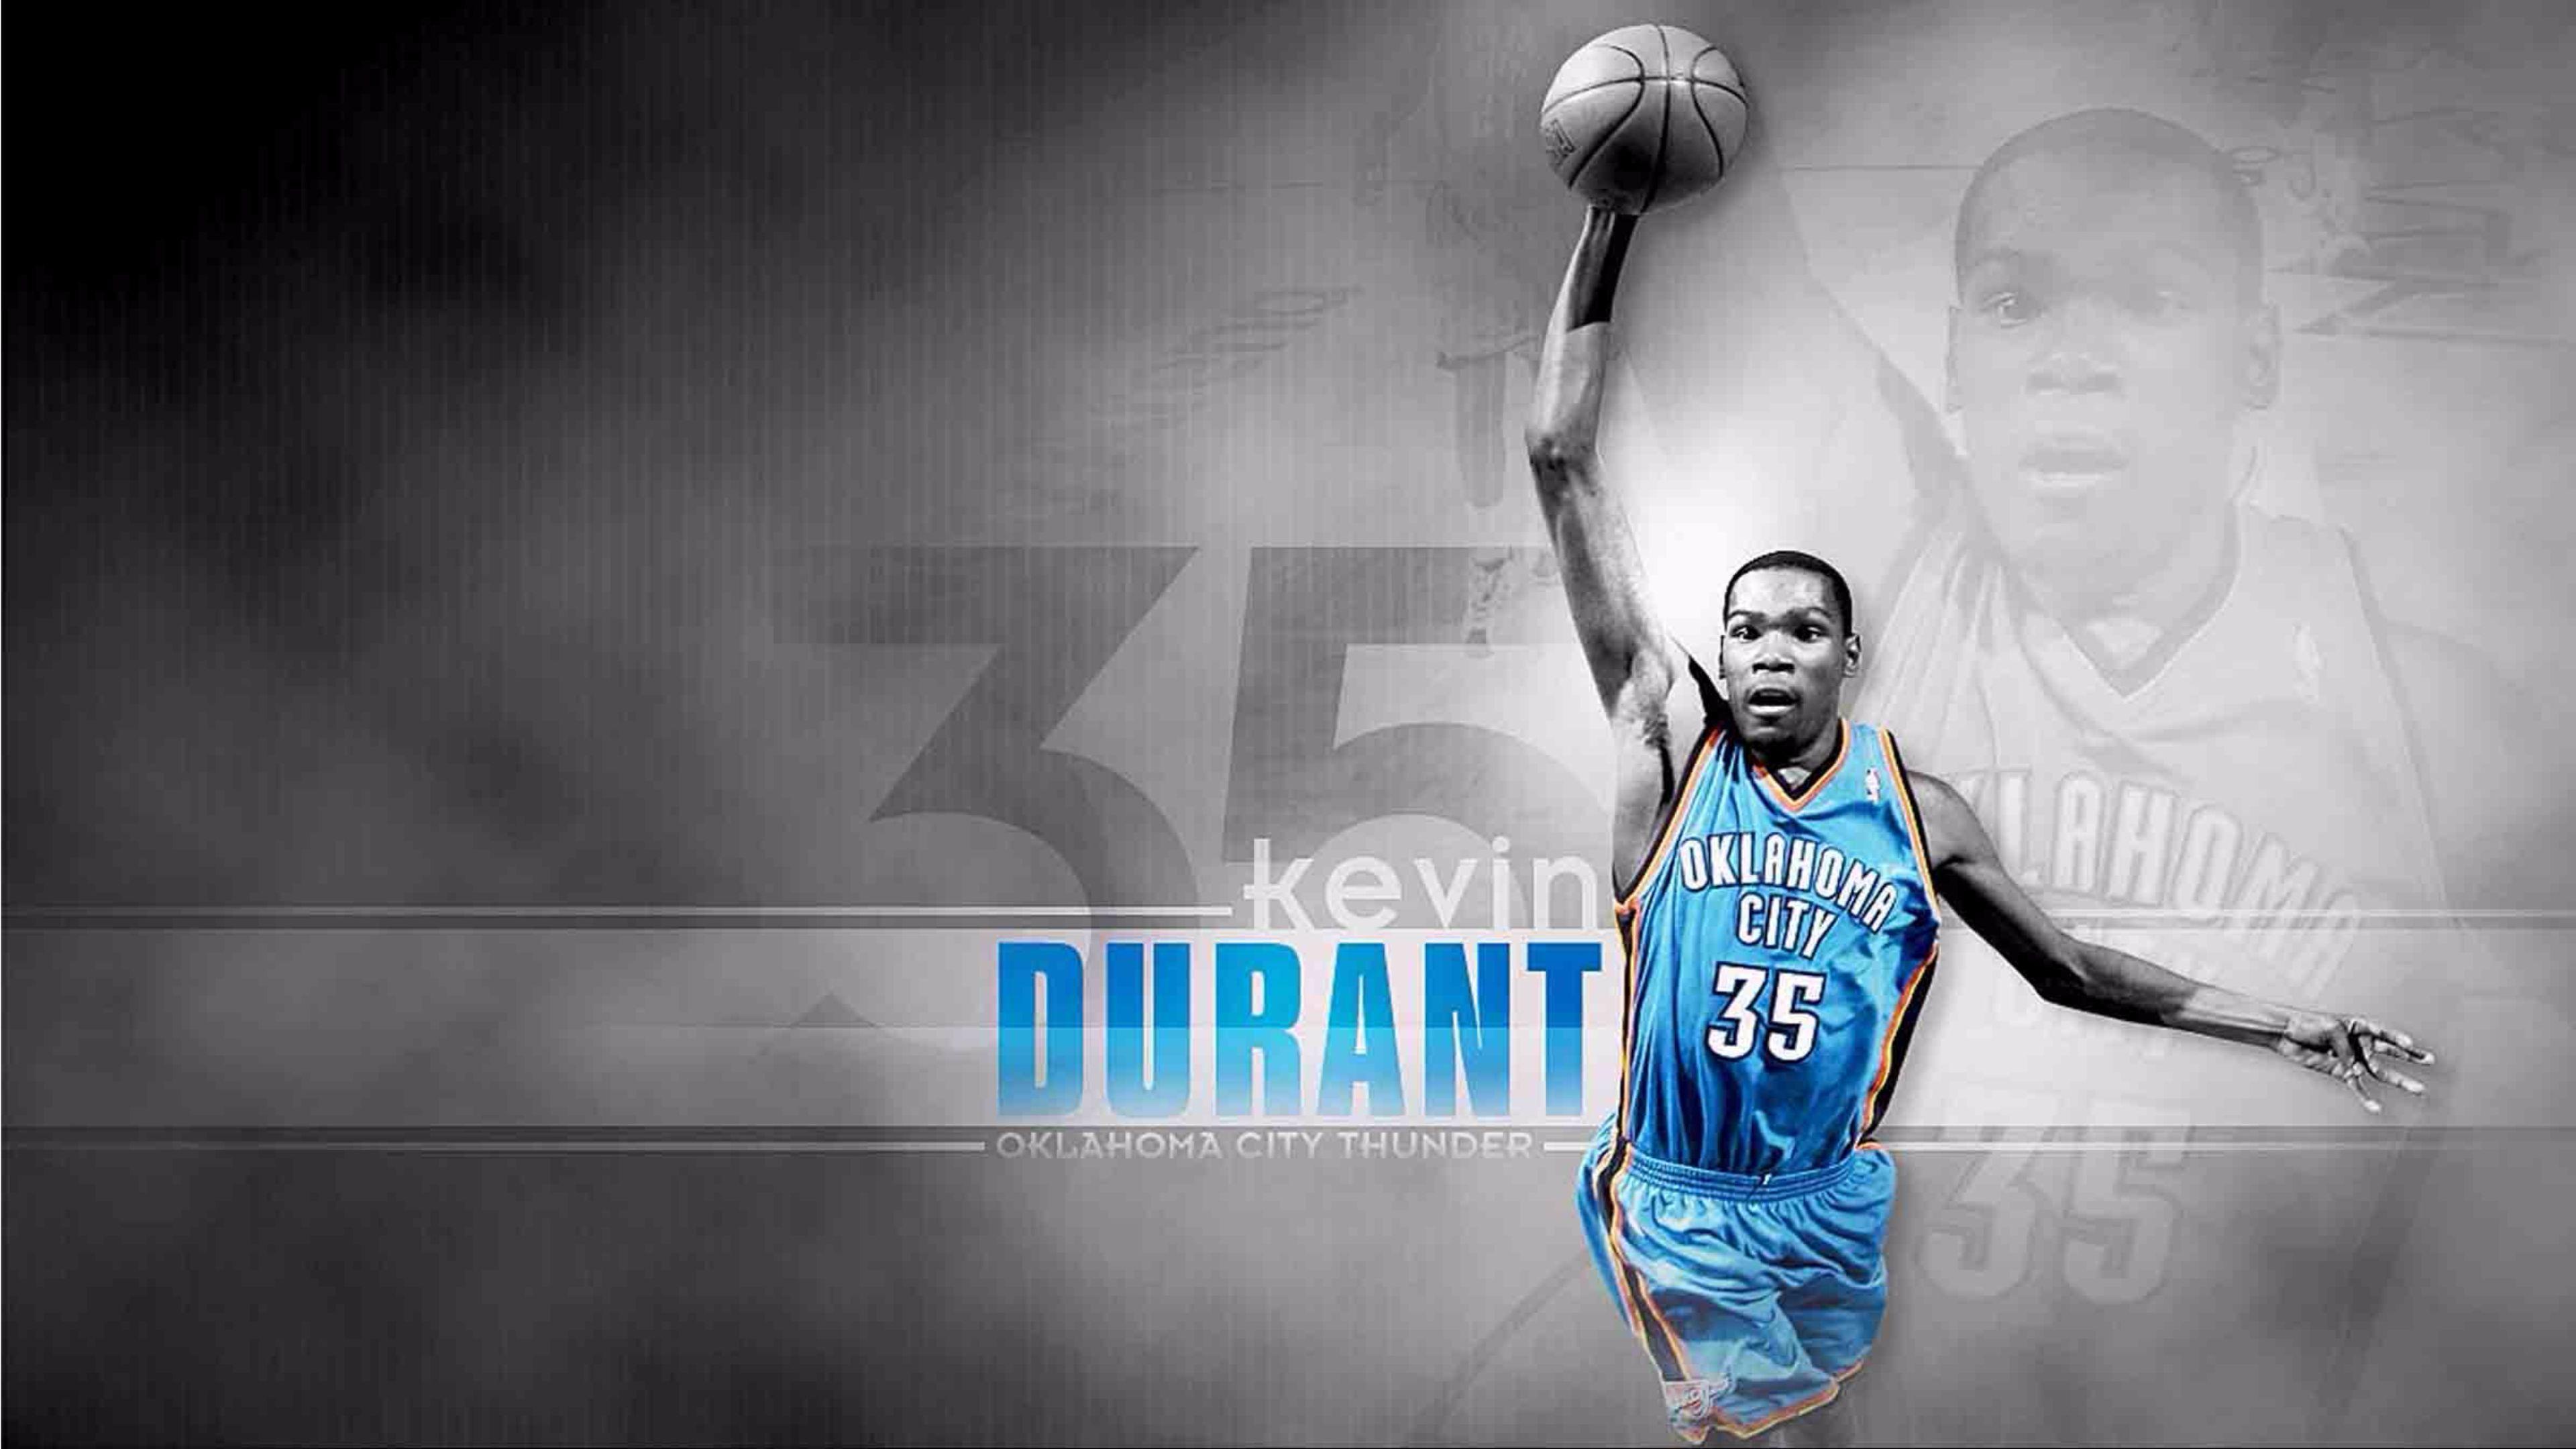 Kevin Durant Wallpapers 2016 - Wallpaper Cave